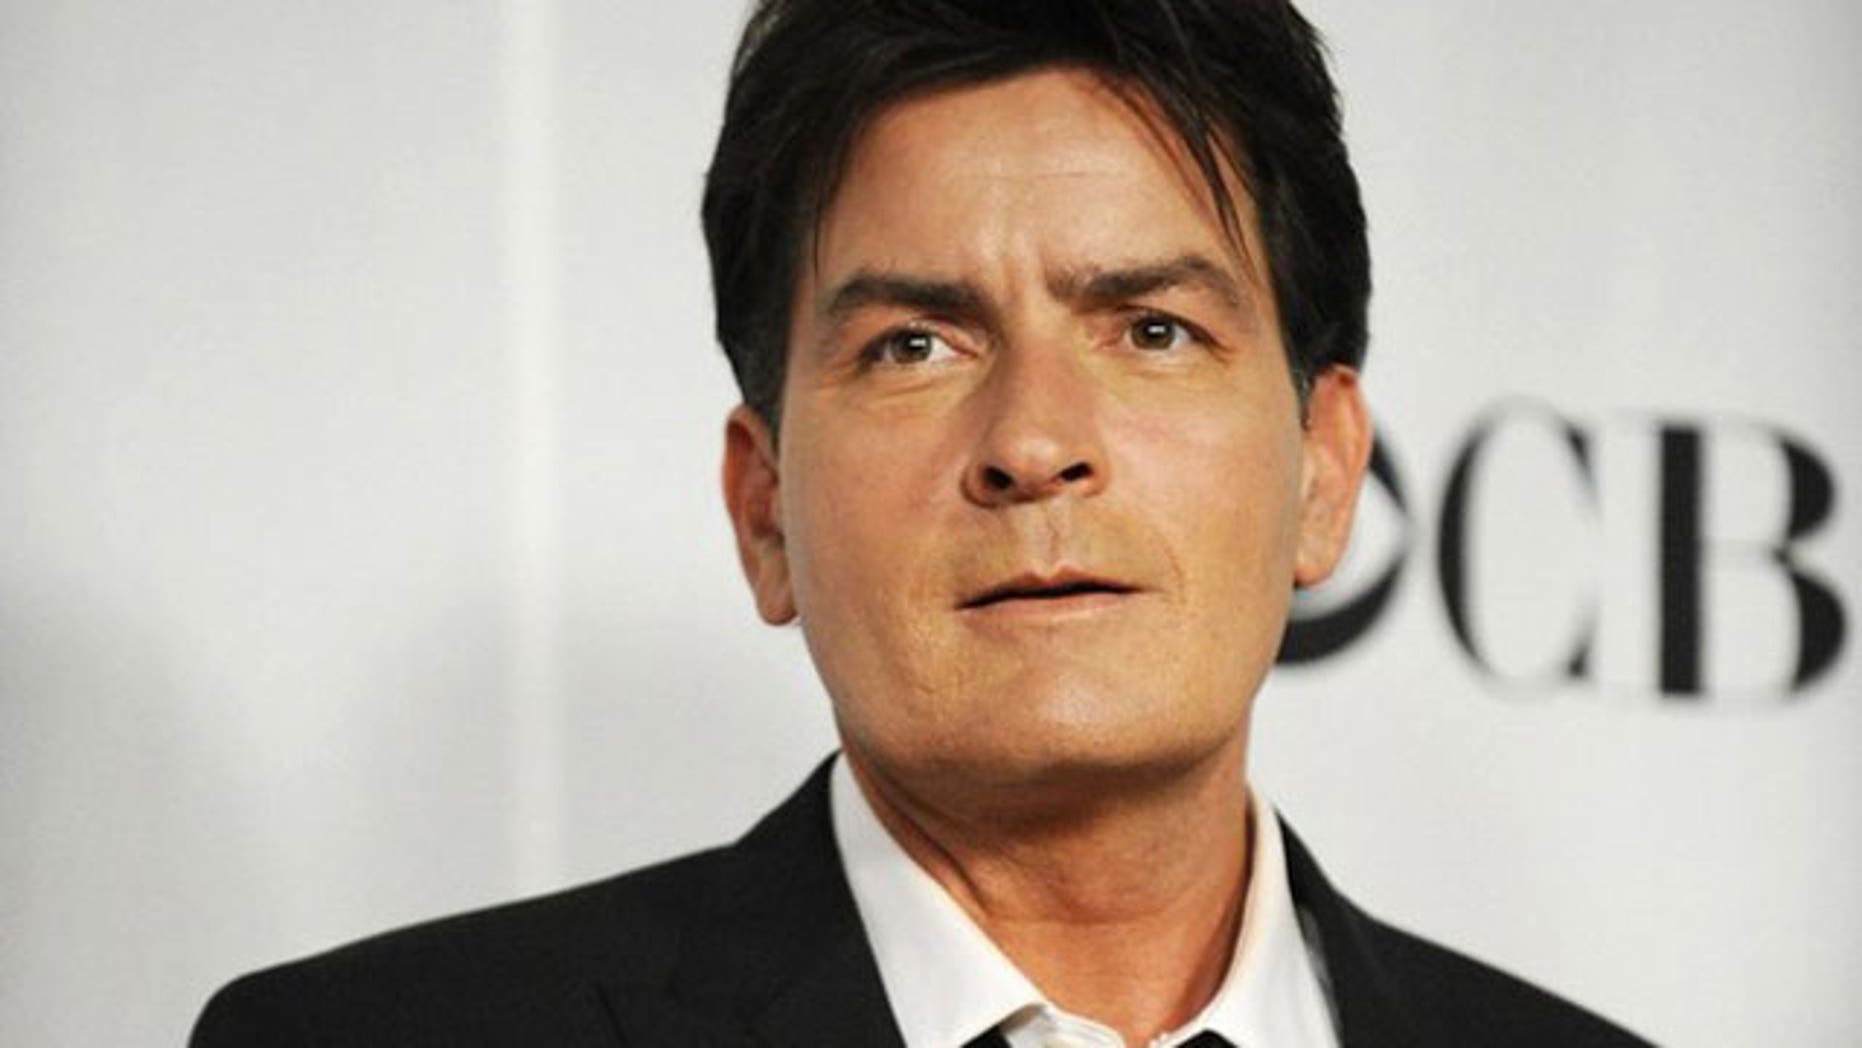 Youngest Looking Porn Satar - Could Charlie Sheen Crash Oscars With Porn Star Pals? | Fox News